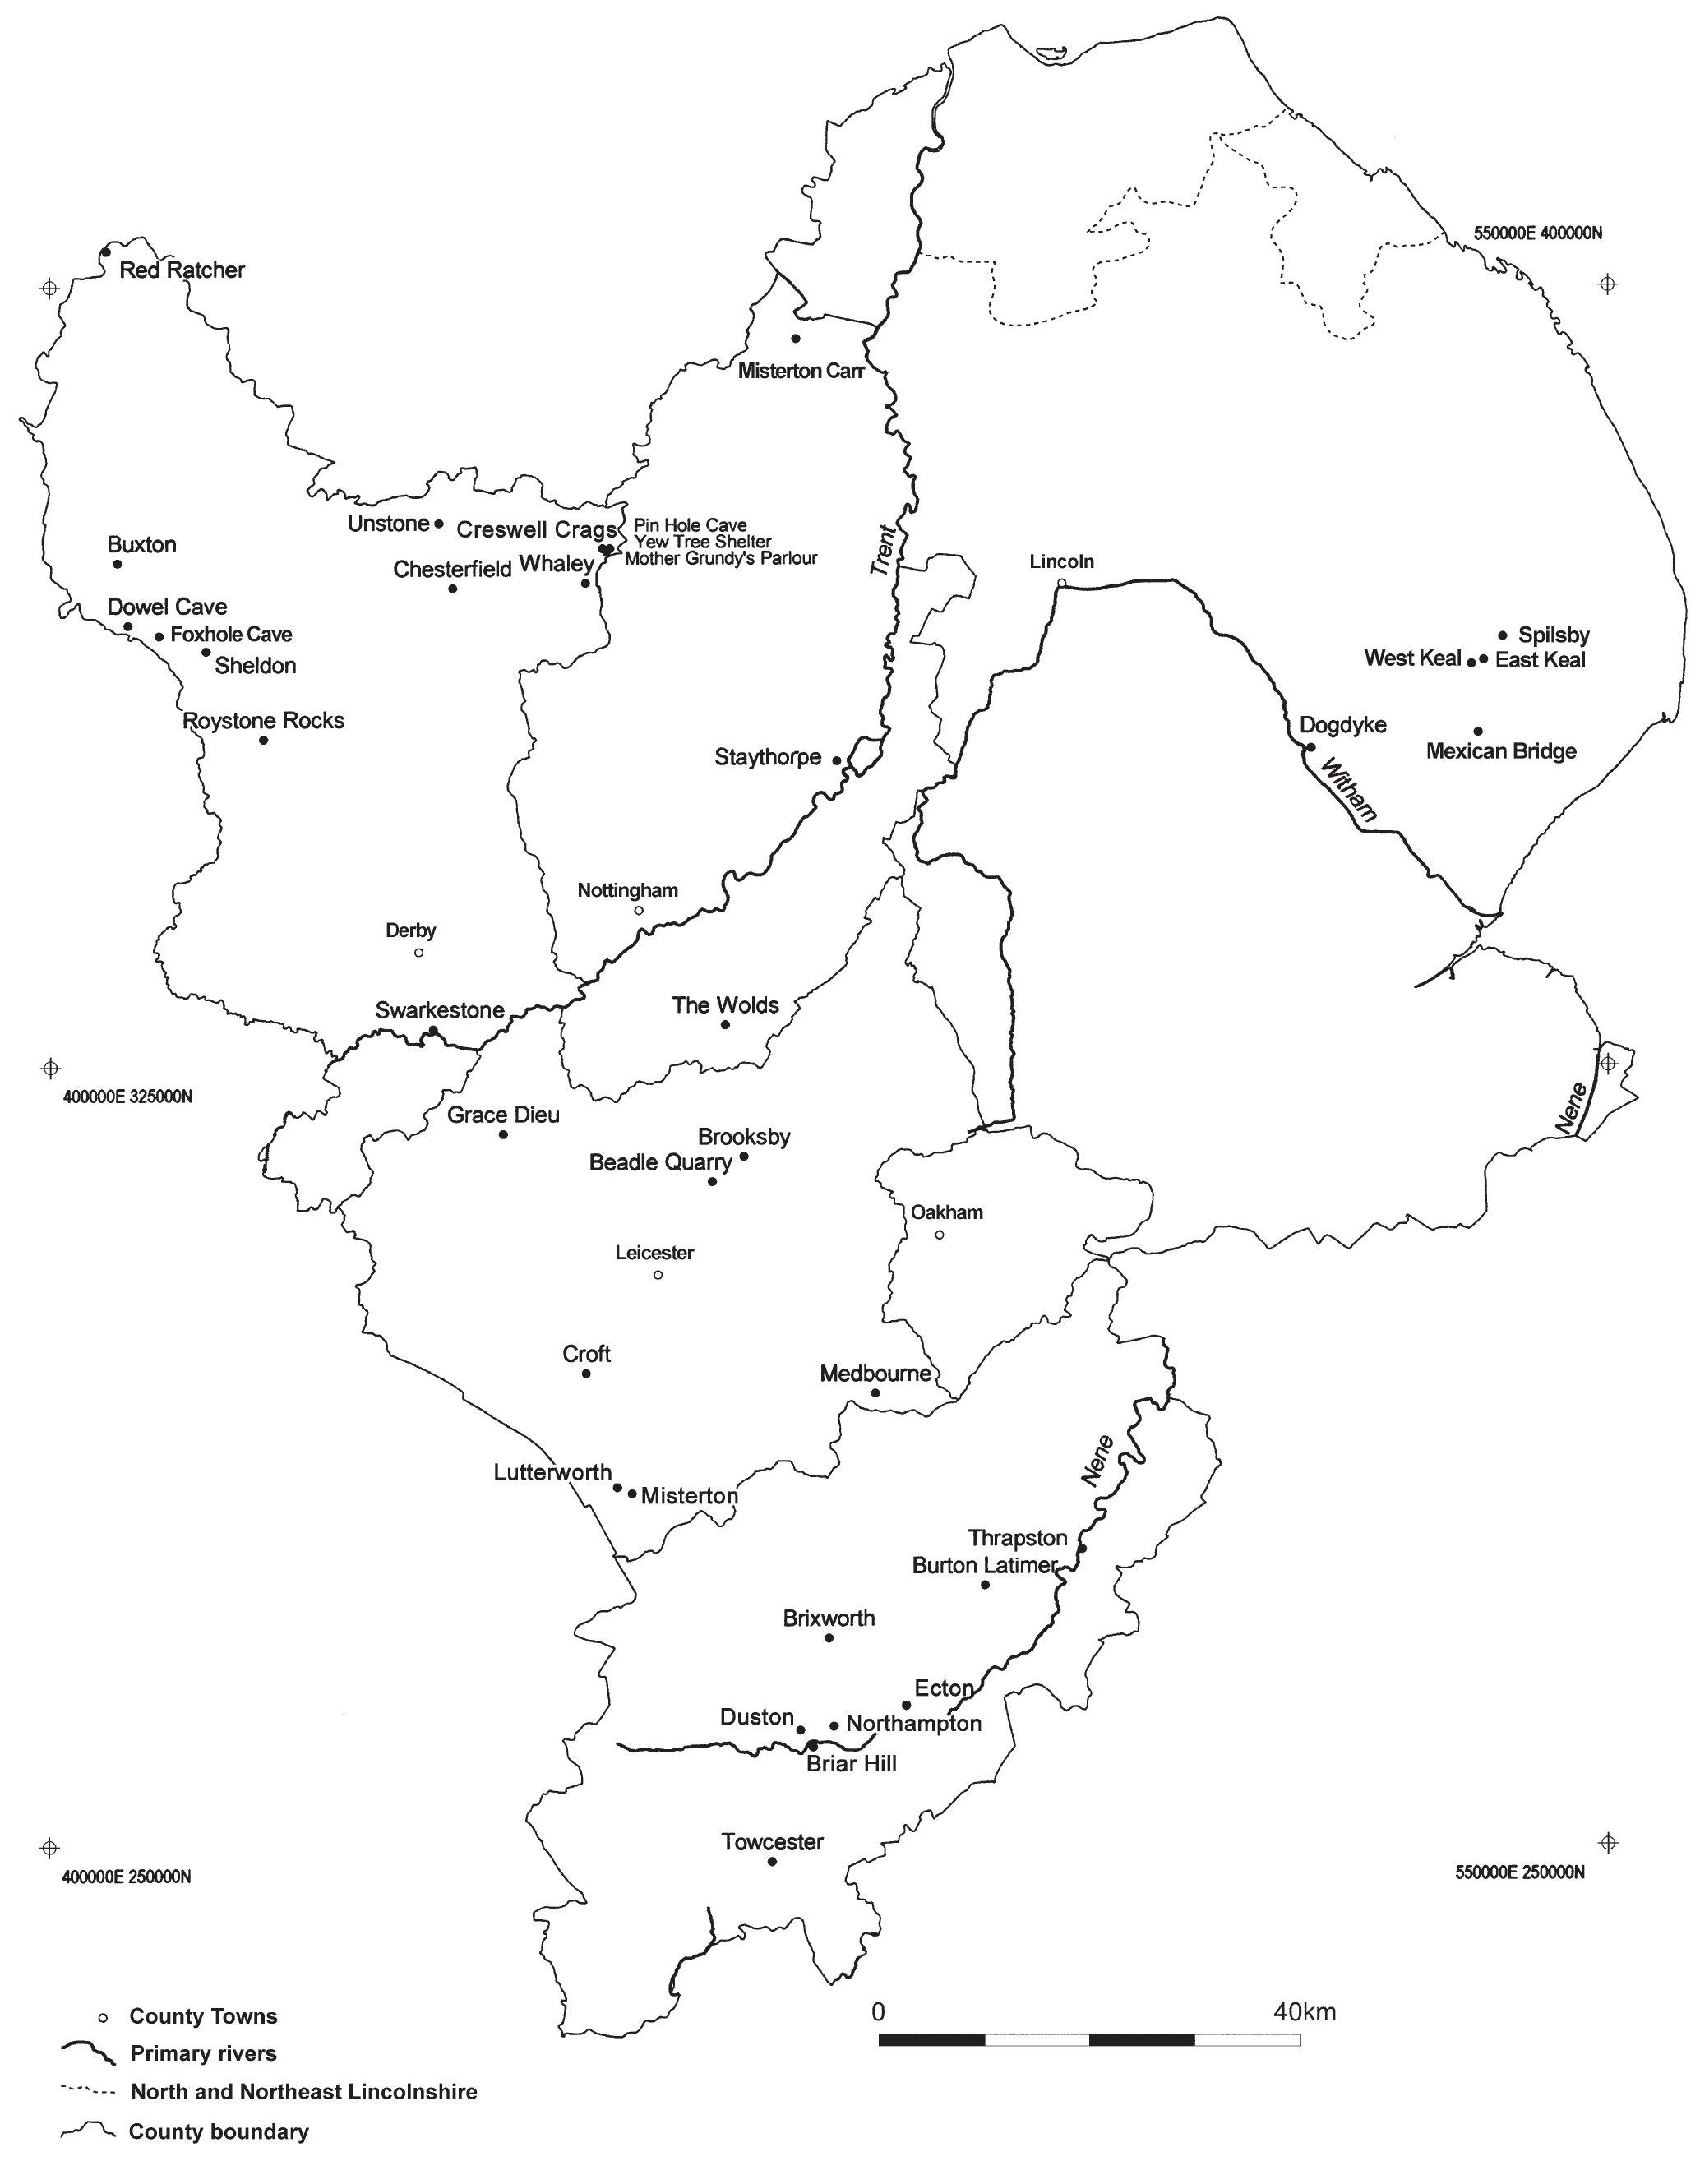 A map of the midlands showing mesolithic sites mentioned in the text. Sites are widespread, but there are concentrations in the north-west and along the river Nene.